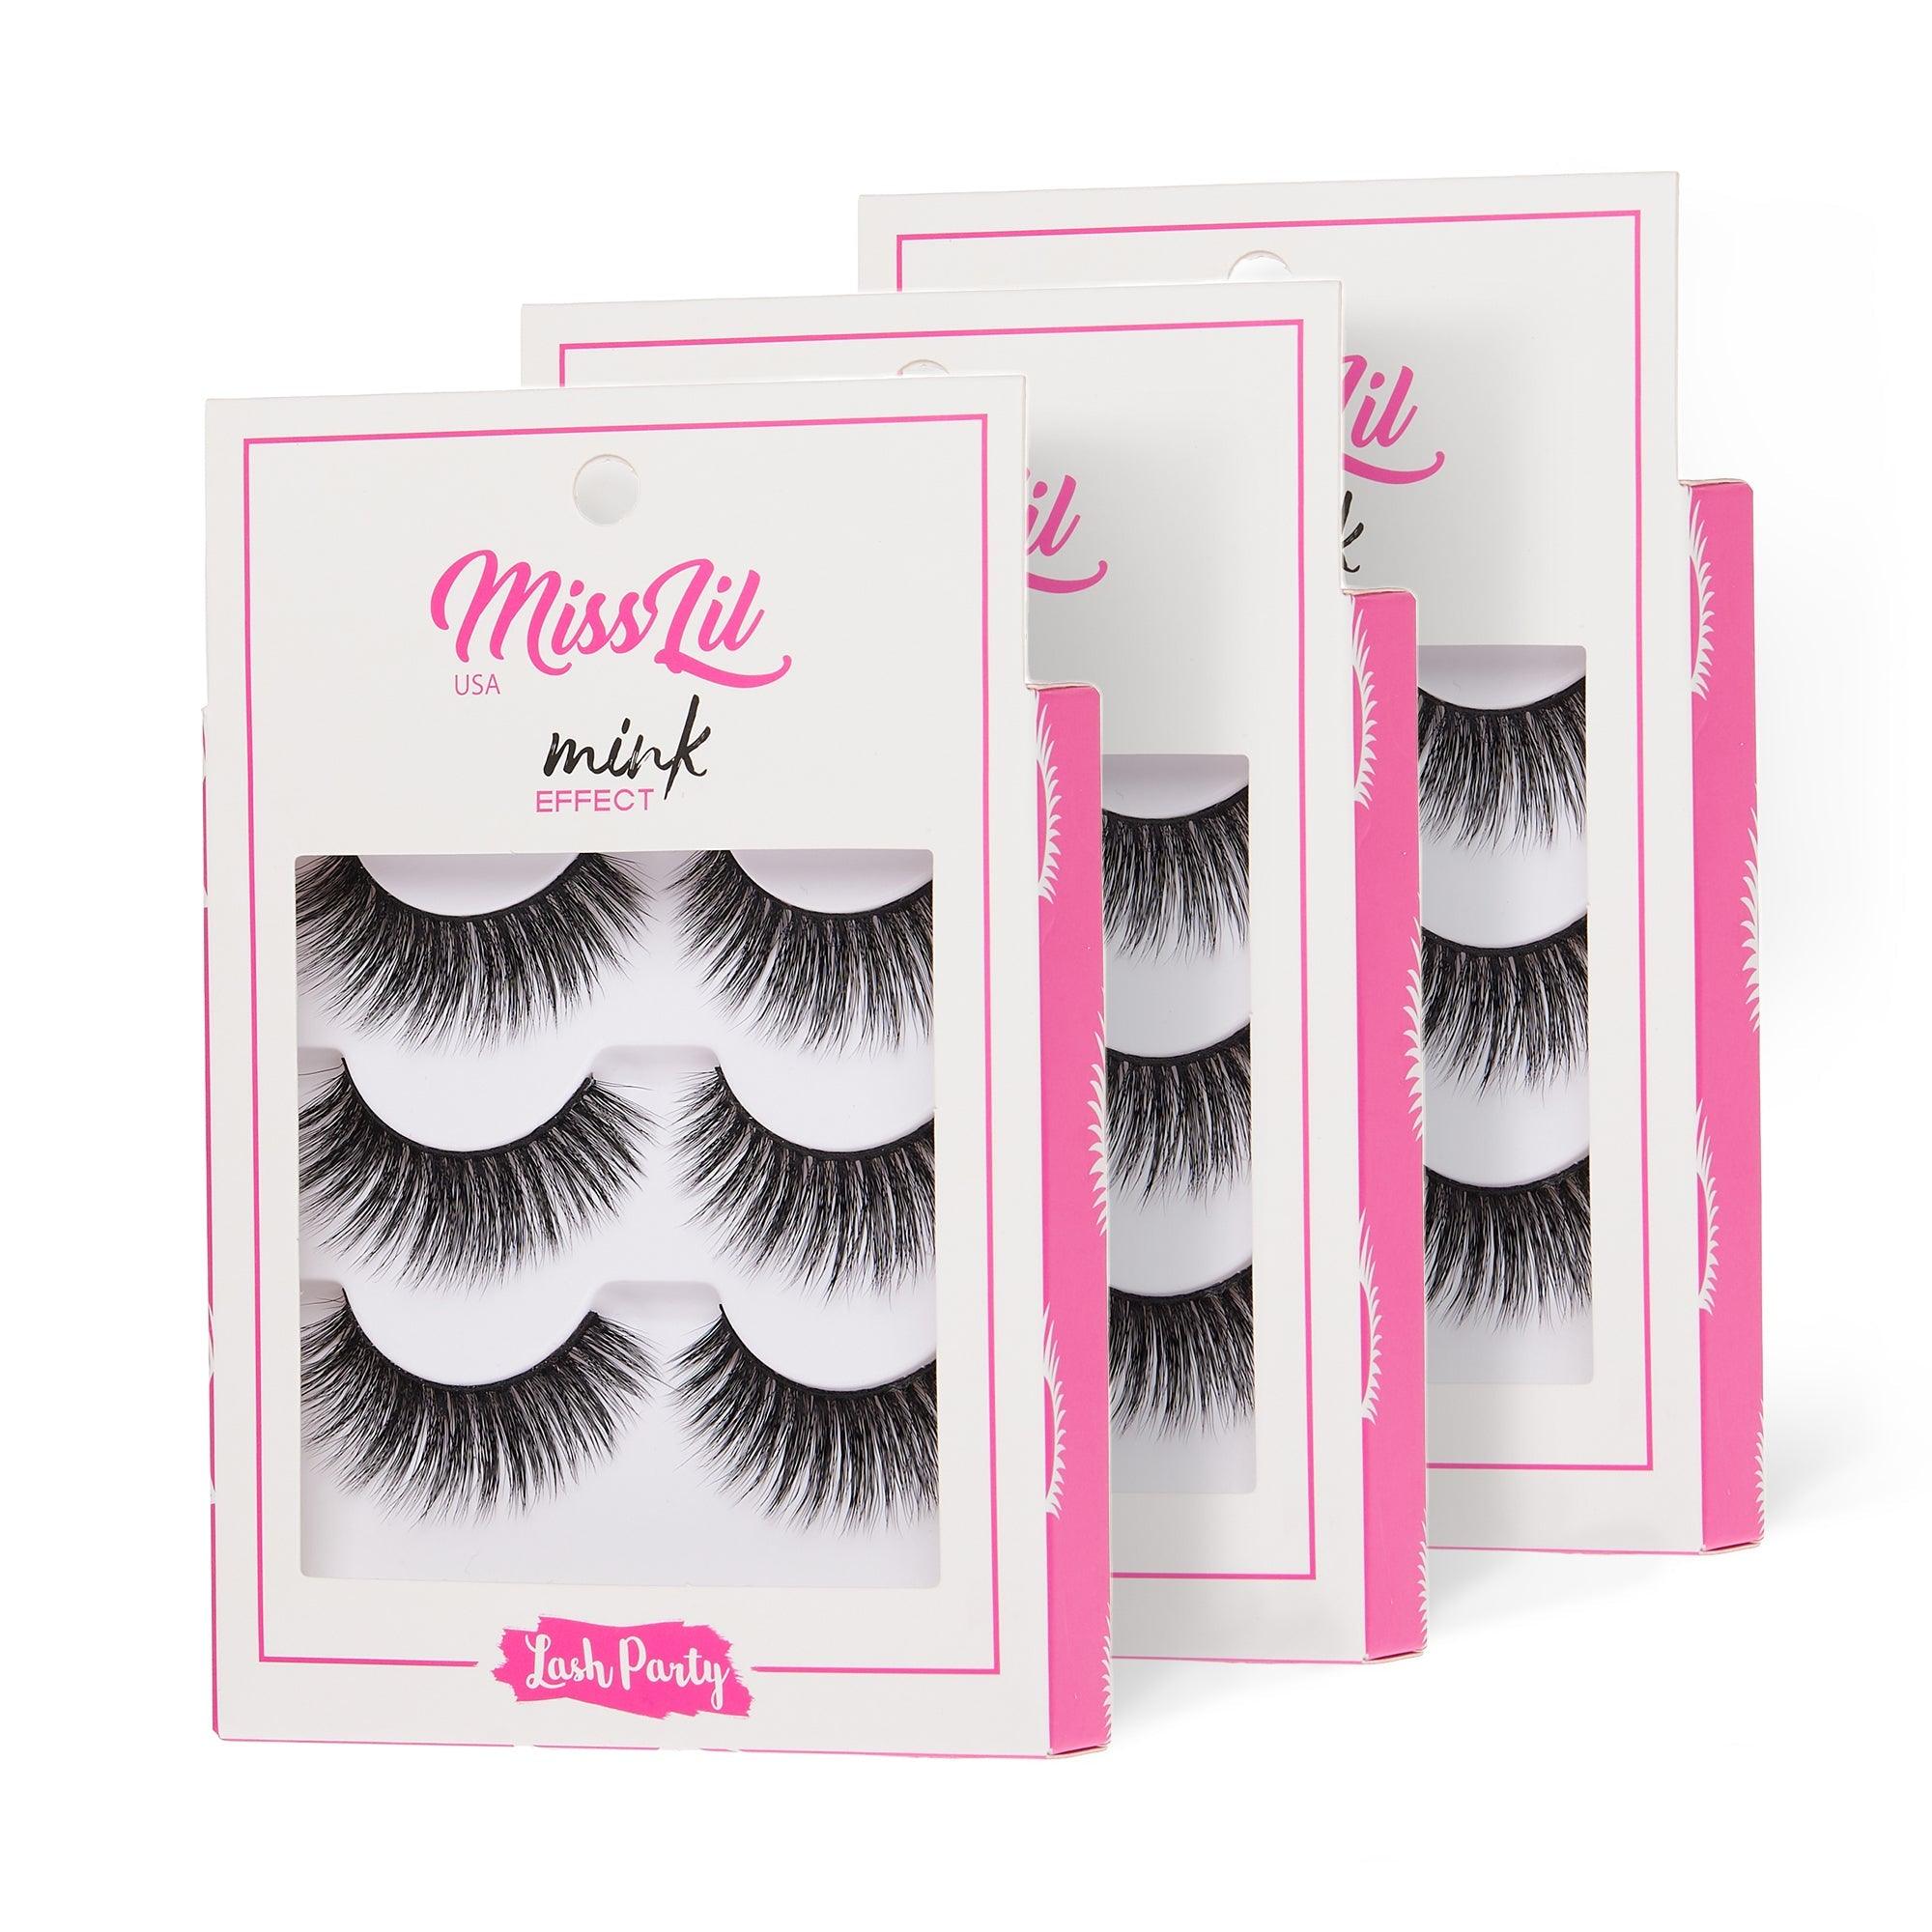 3-Pair Faux Mink Effect Eyelashes - Lash Party Collection #10 - Pack of 12 - Miss Lil USA